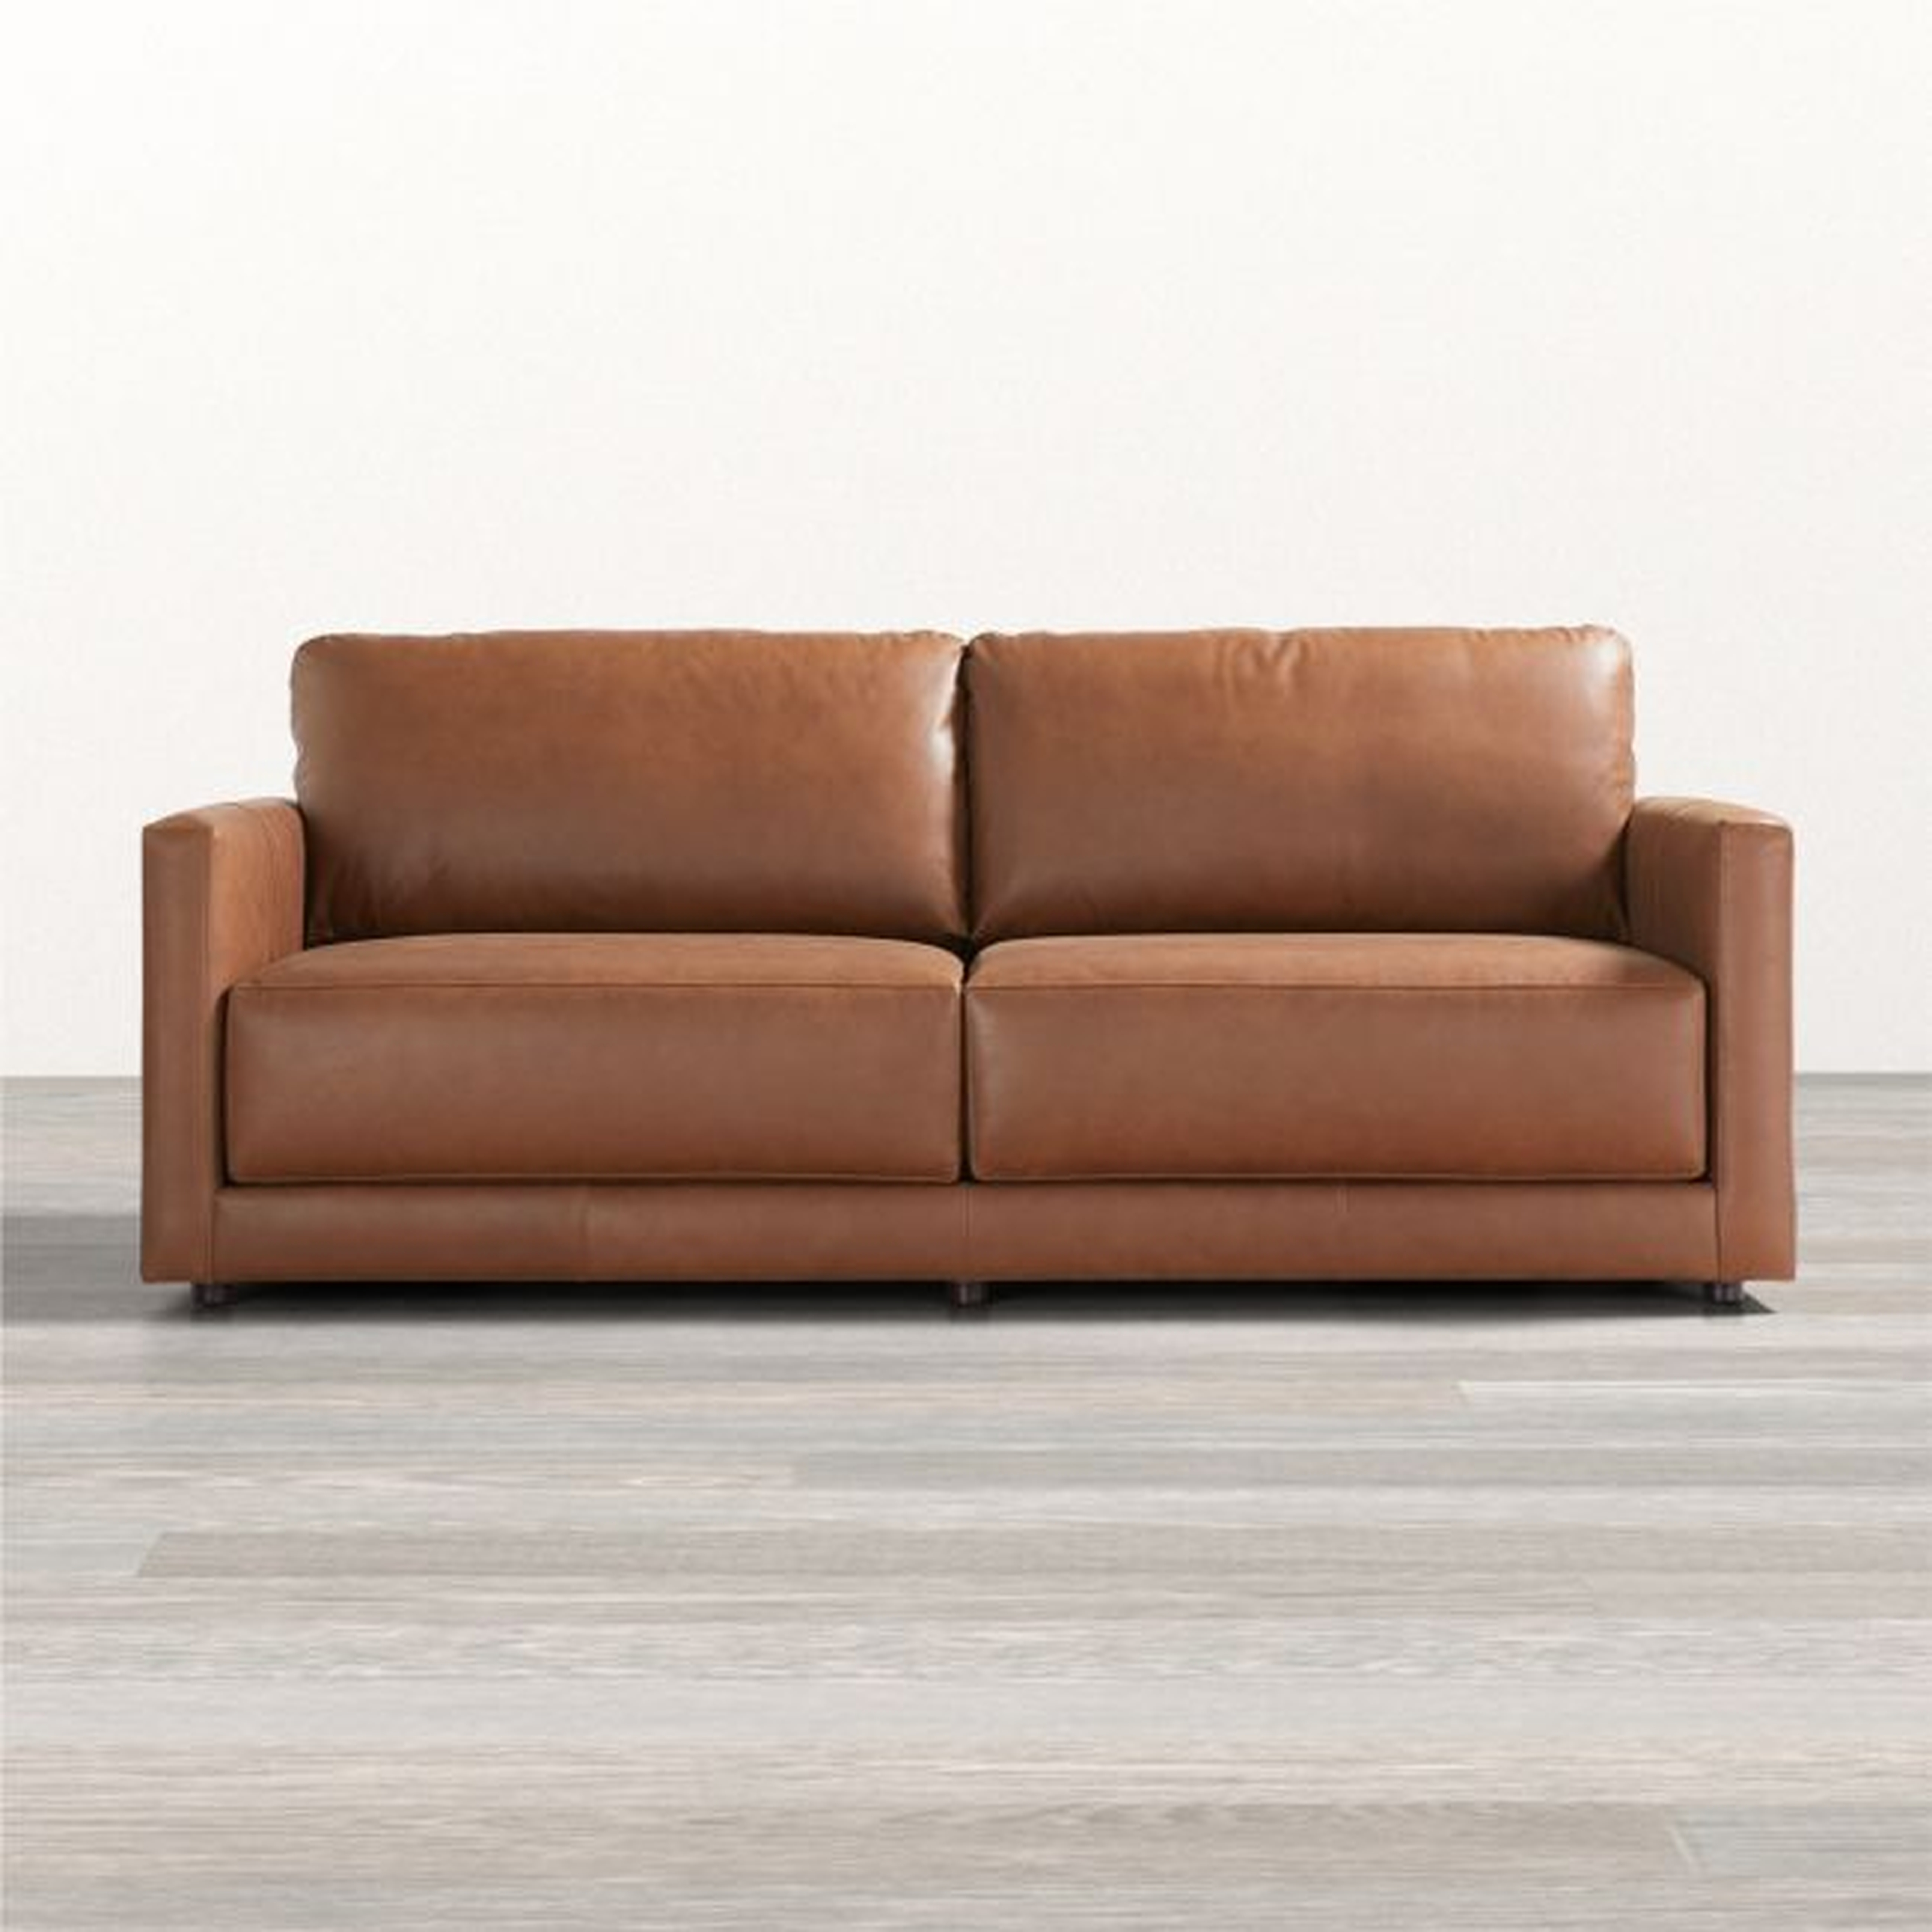 Gather Leather Sofa - Crate and Barrel